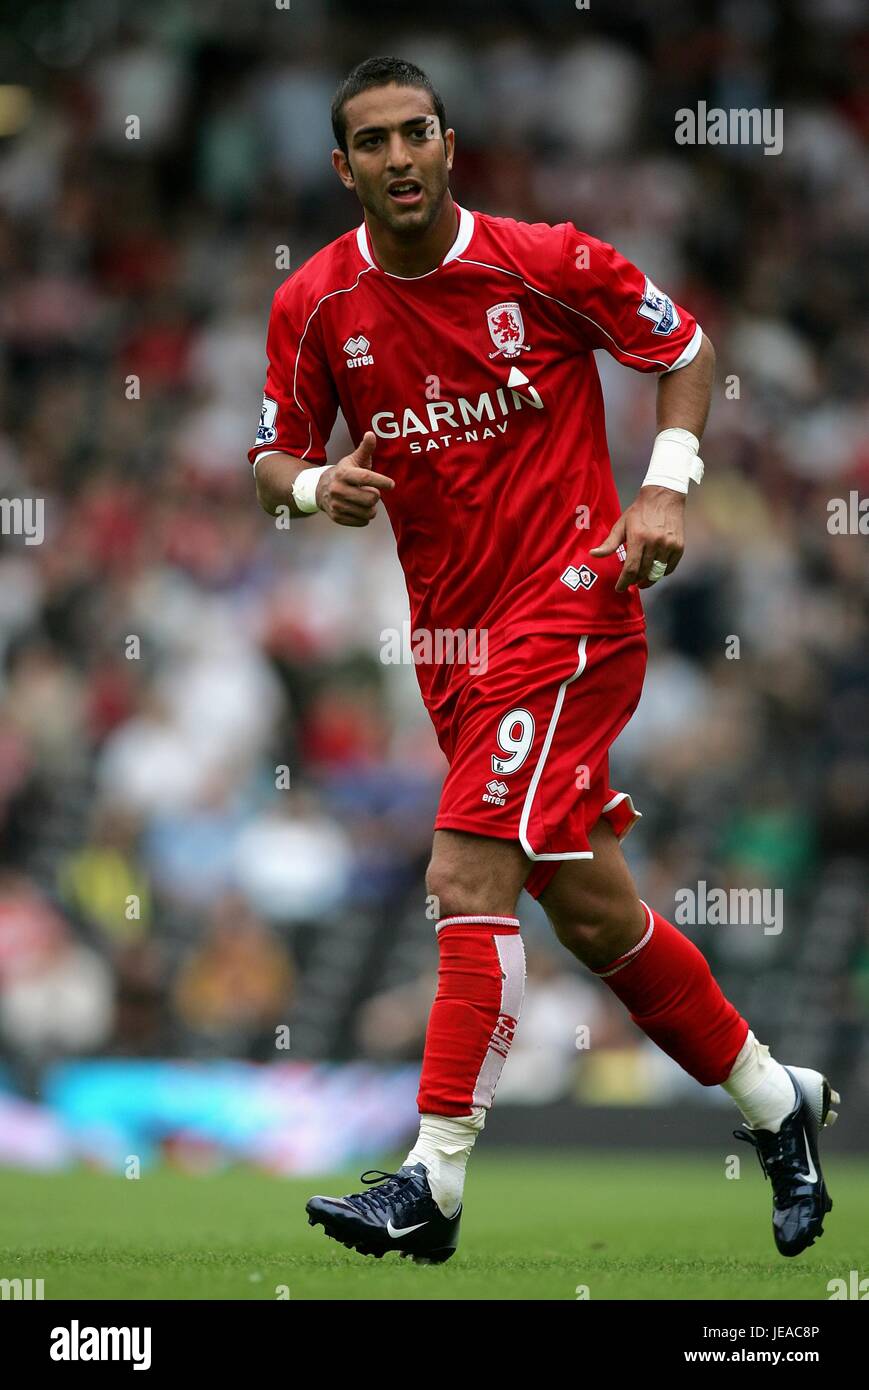 MIDO MIDDLESBROUGH FC CRAVEN COTTAGE LONDON GREAT BRITAIN 18 August 2007 Stock Photo